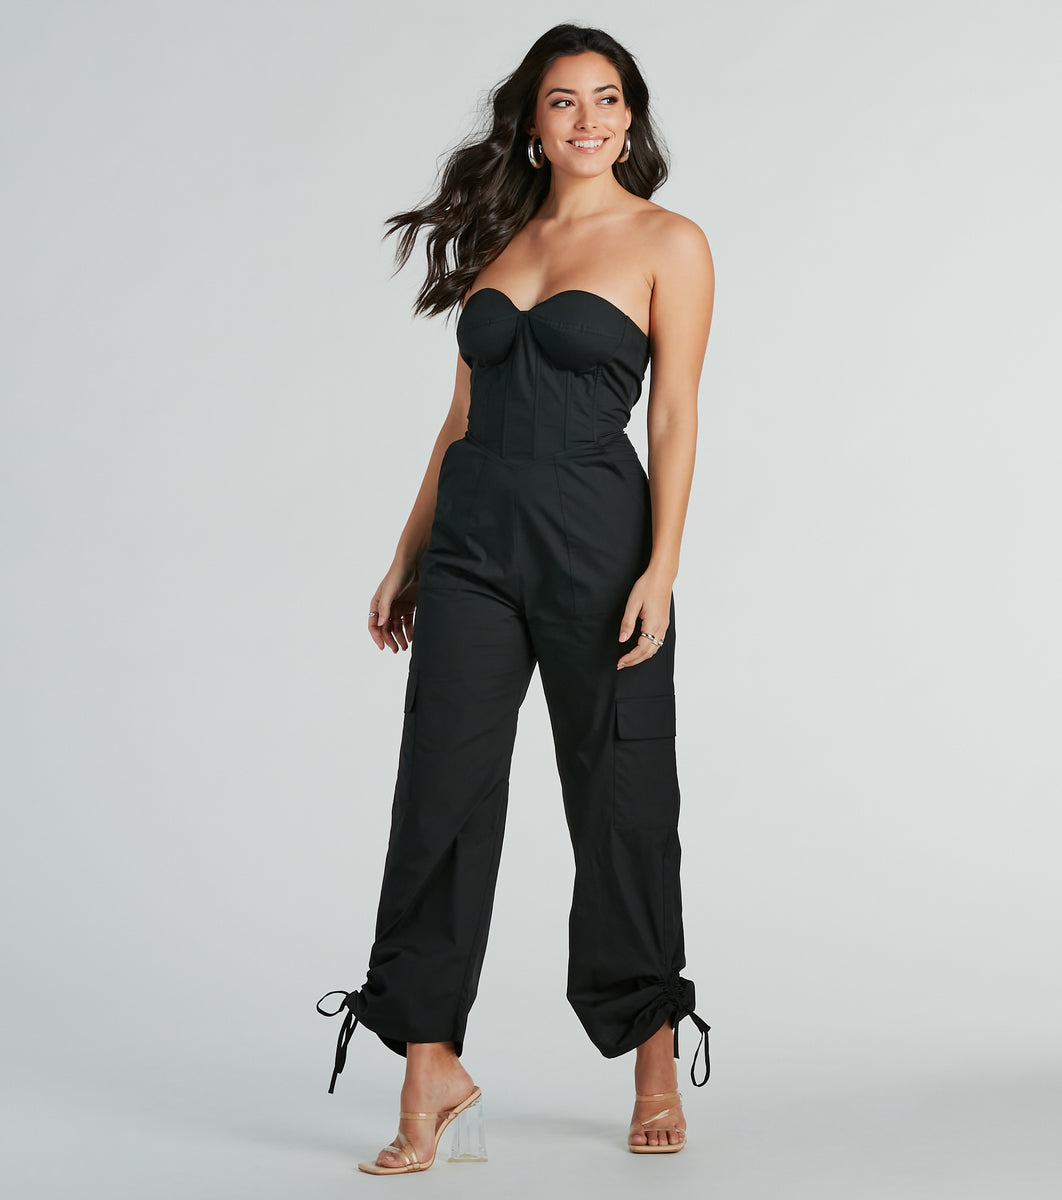 Windsor Bae O'clock Strapless Lace-Up Jumpsuit | CoolSprings Galleria